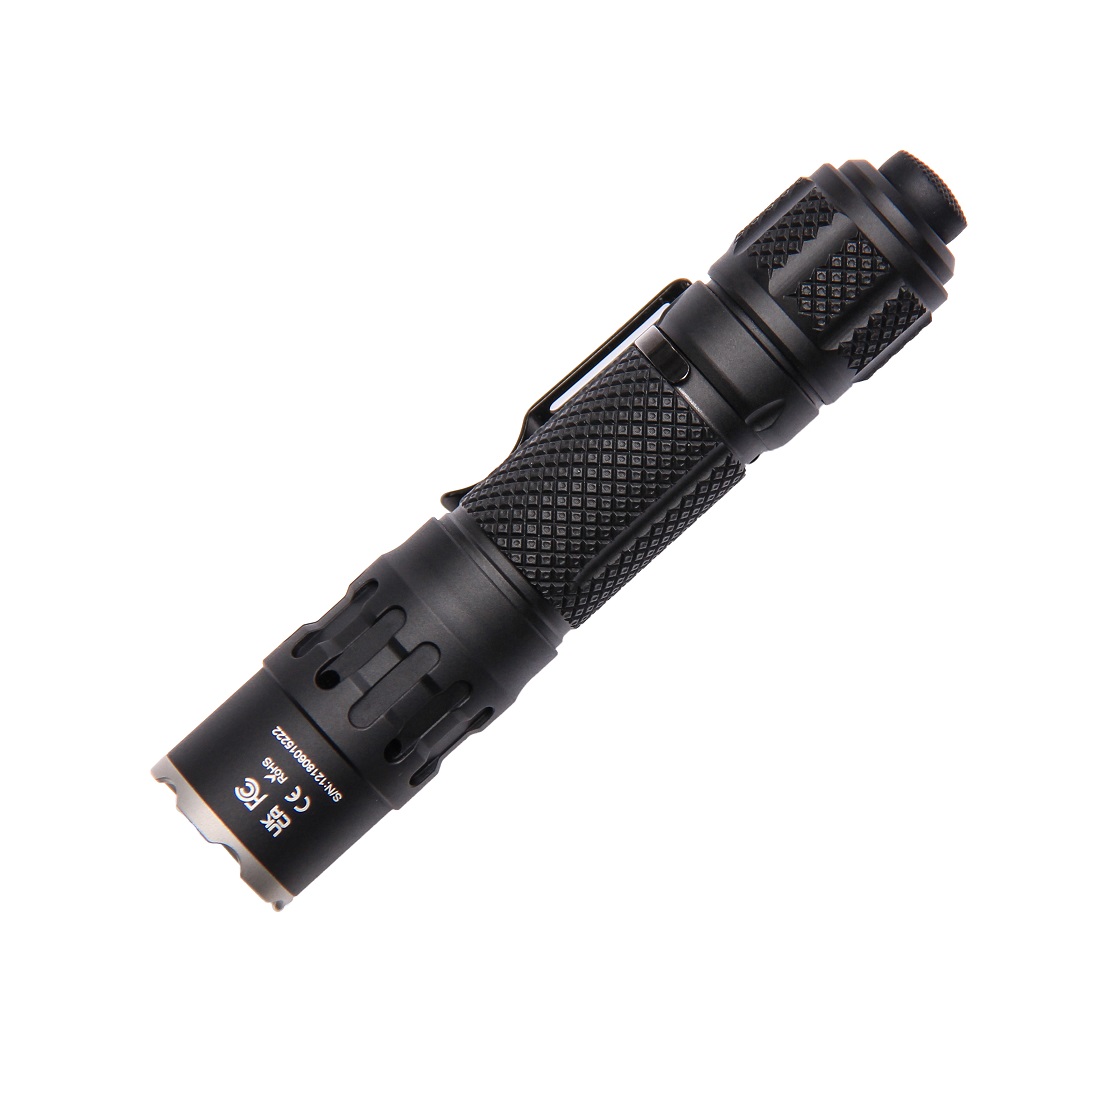 Weltool-T2-quotElegant-Pantherquot-1730LM-Compact-EDC-Tactical-Flashlight-Come-with-18650-Battery-Mi-1962931-2